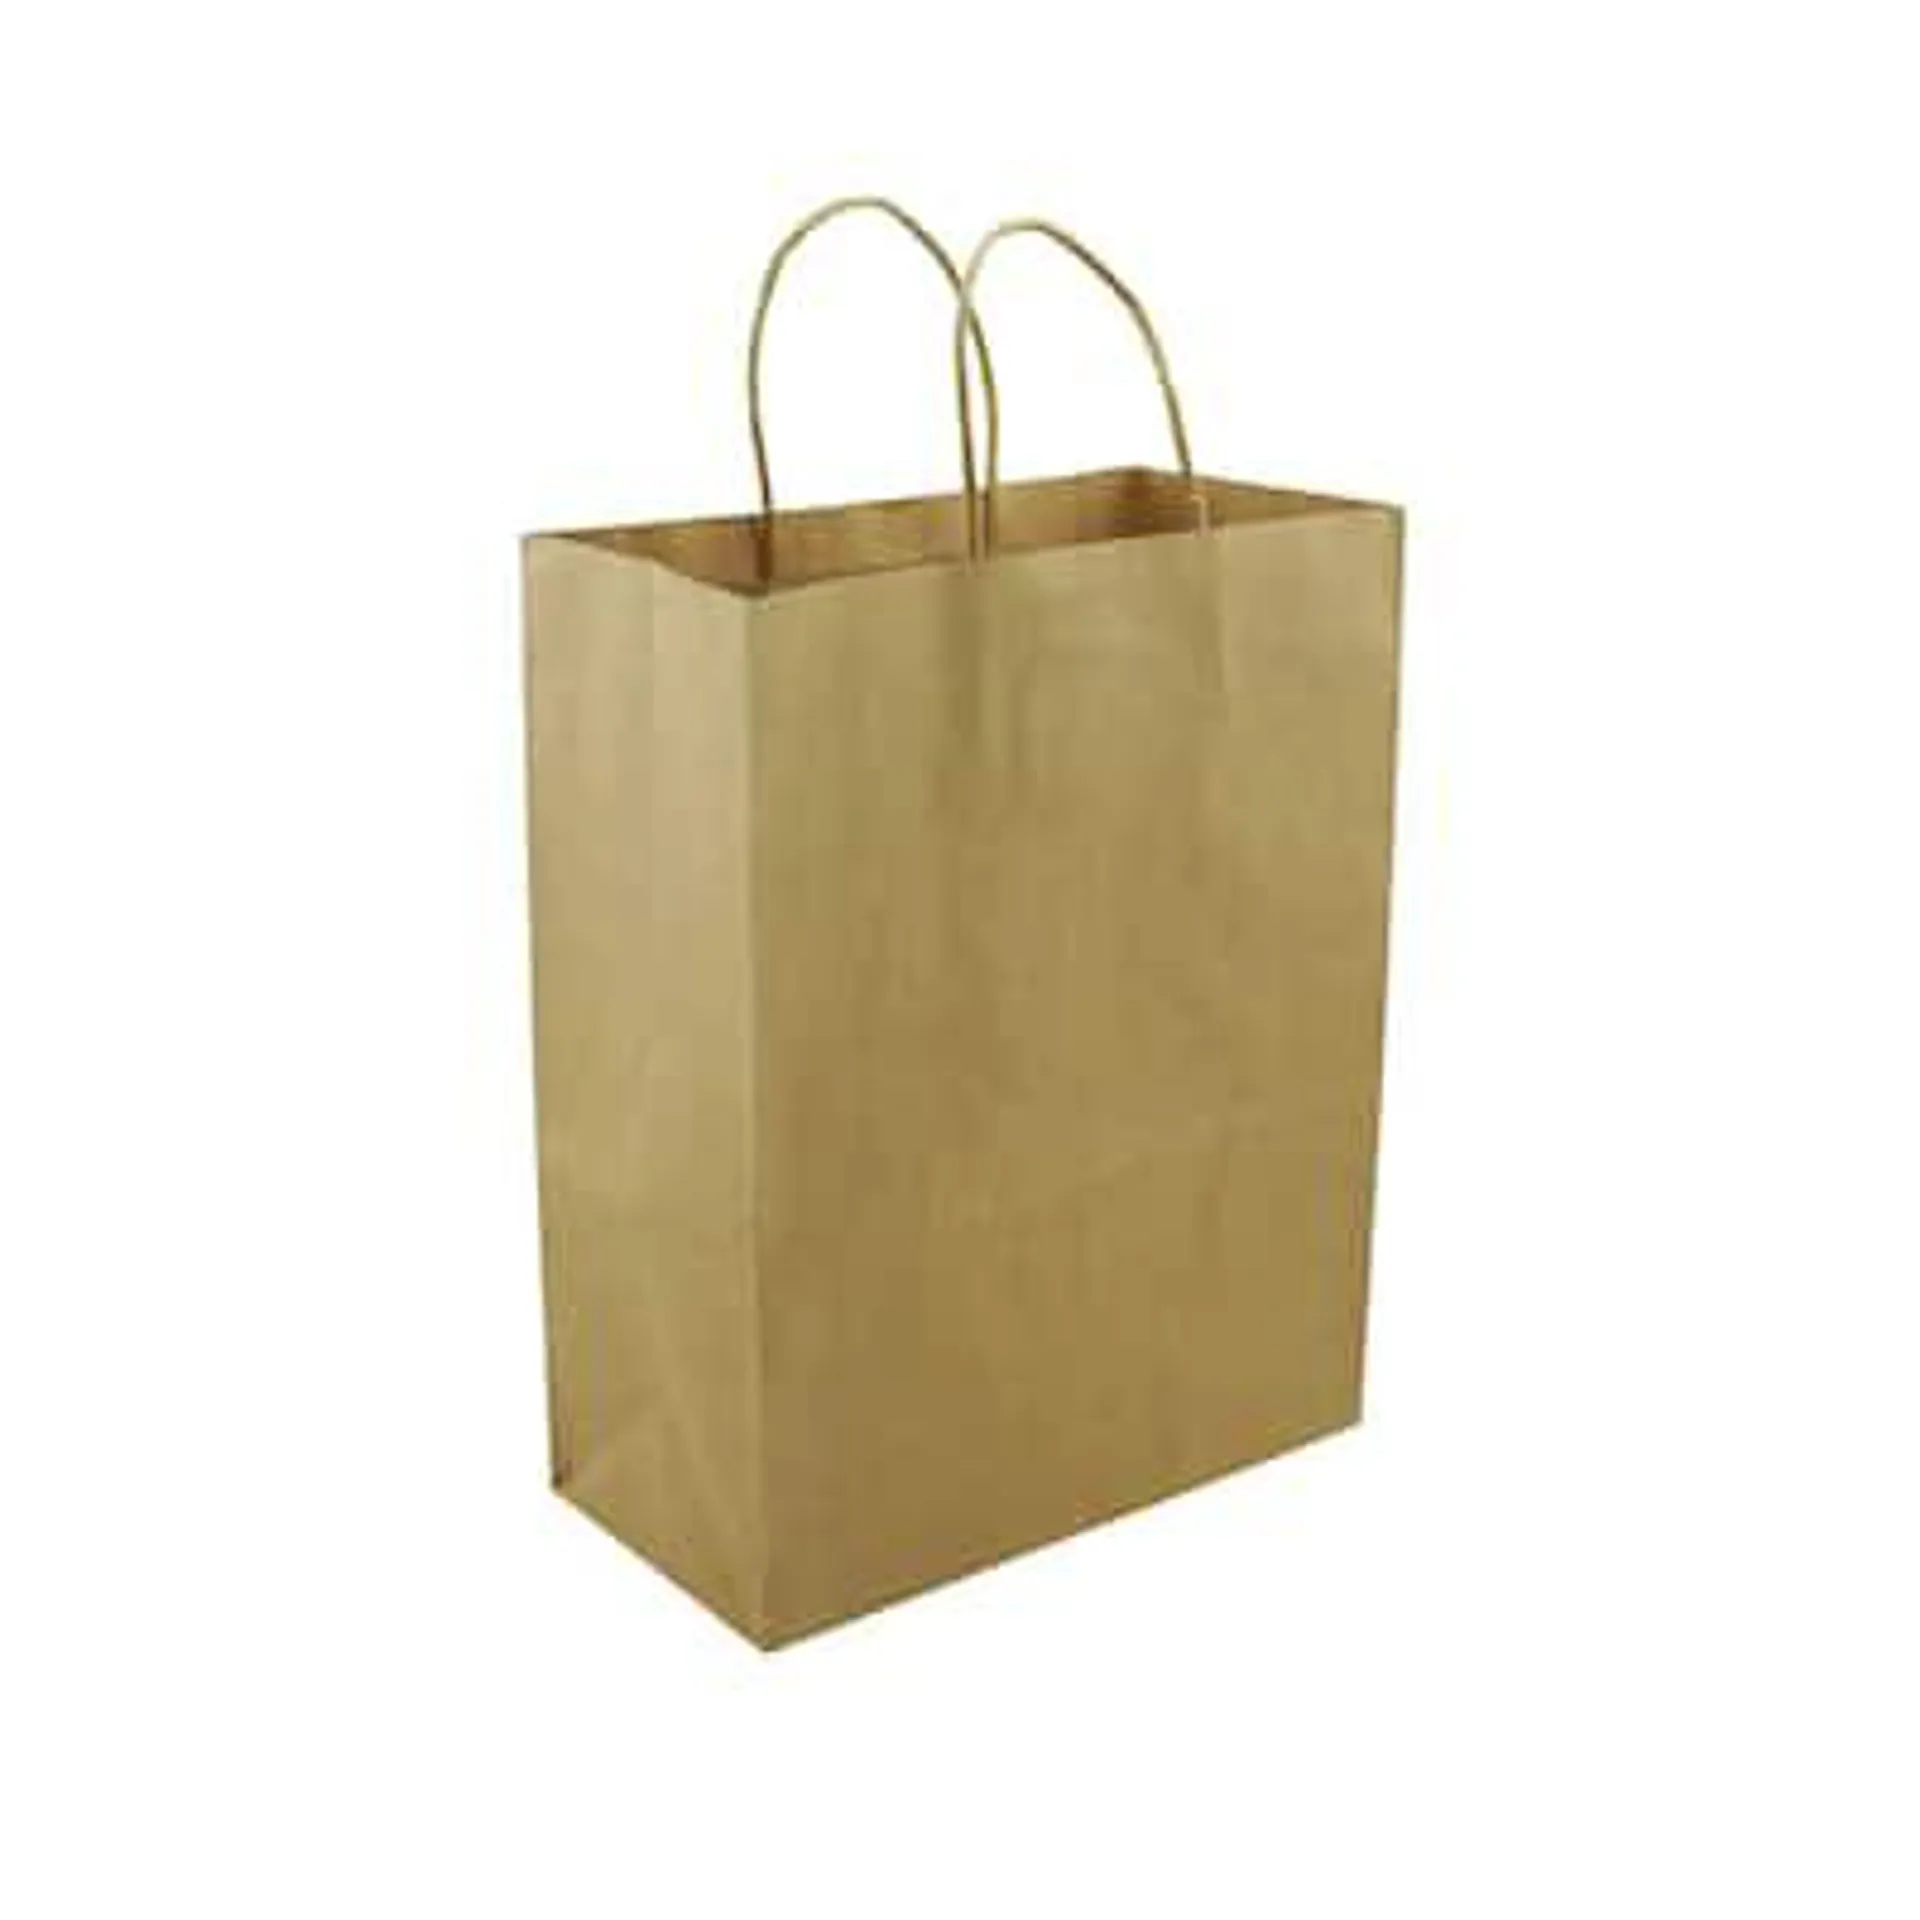 24 Pack: Large Kraft Paper Gift Bag by Celebrate It™